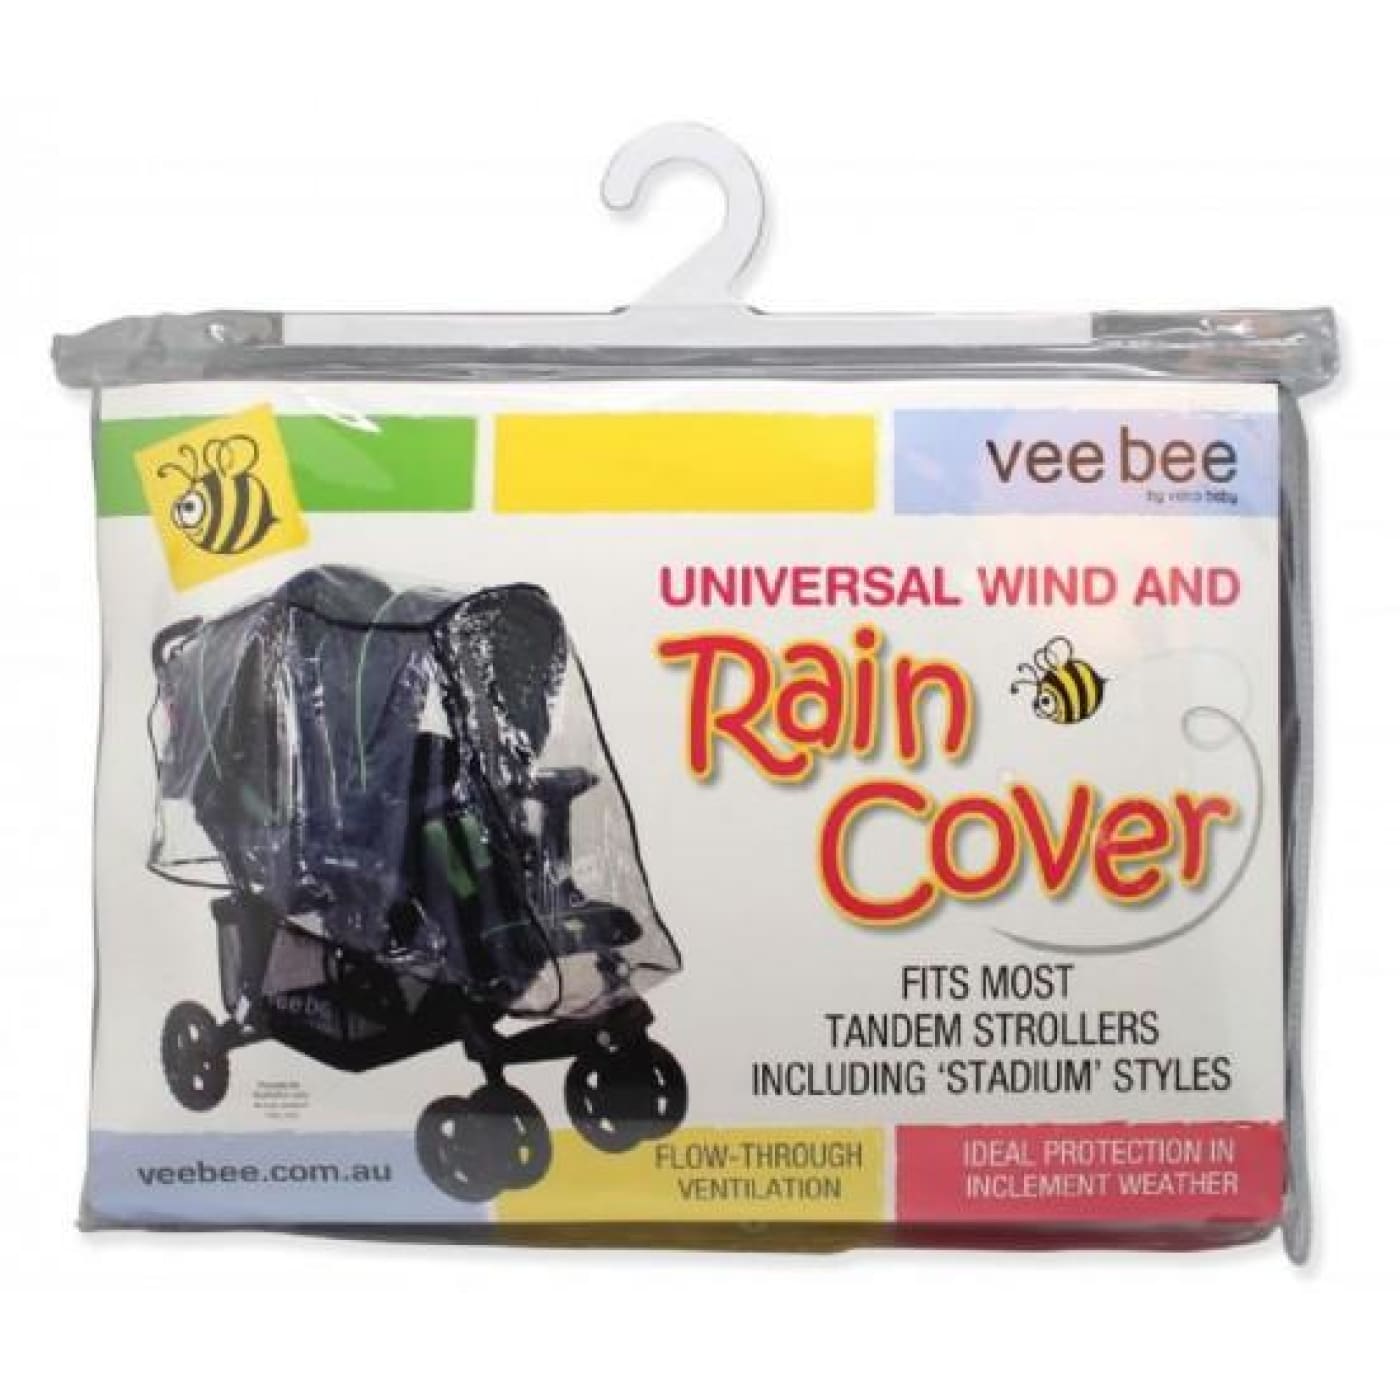 Veebee Raincover Tandem with Dual Hoods - PRAMS & STROLLERS - SUN COVERS/WEATHER SHIELDS